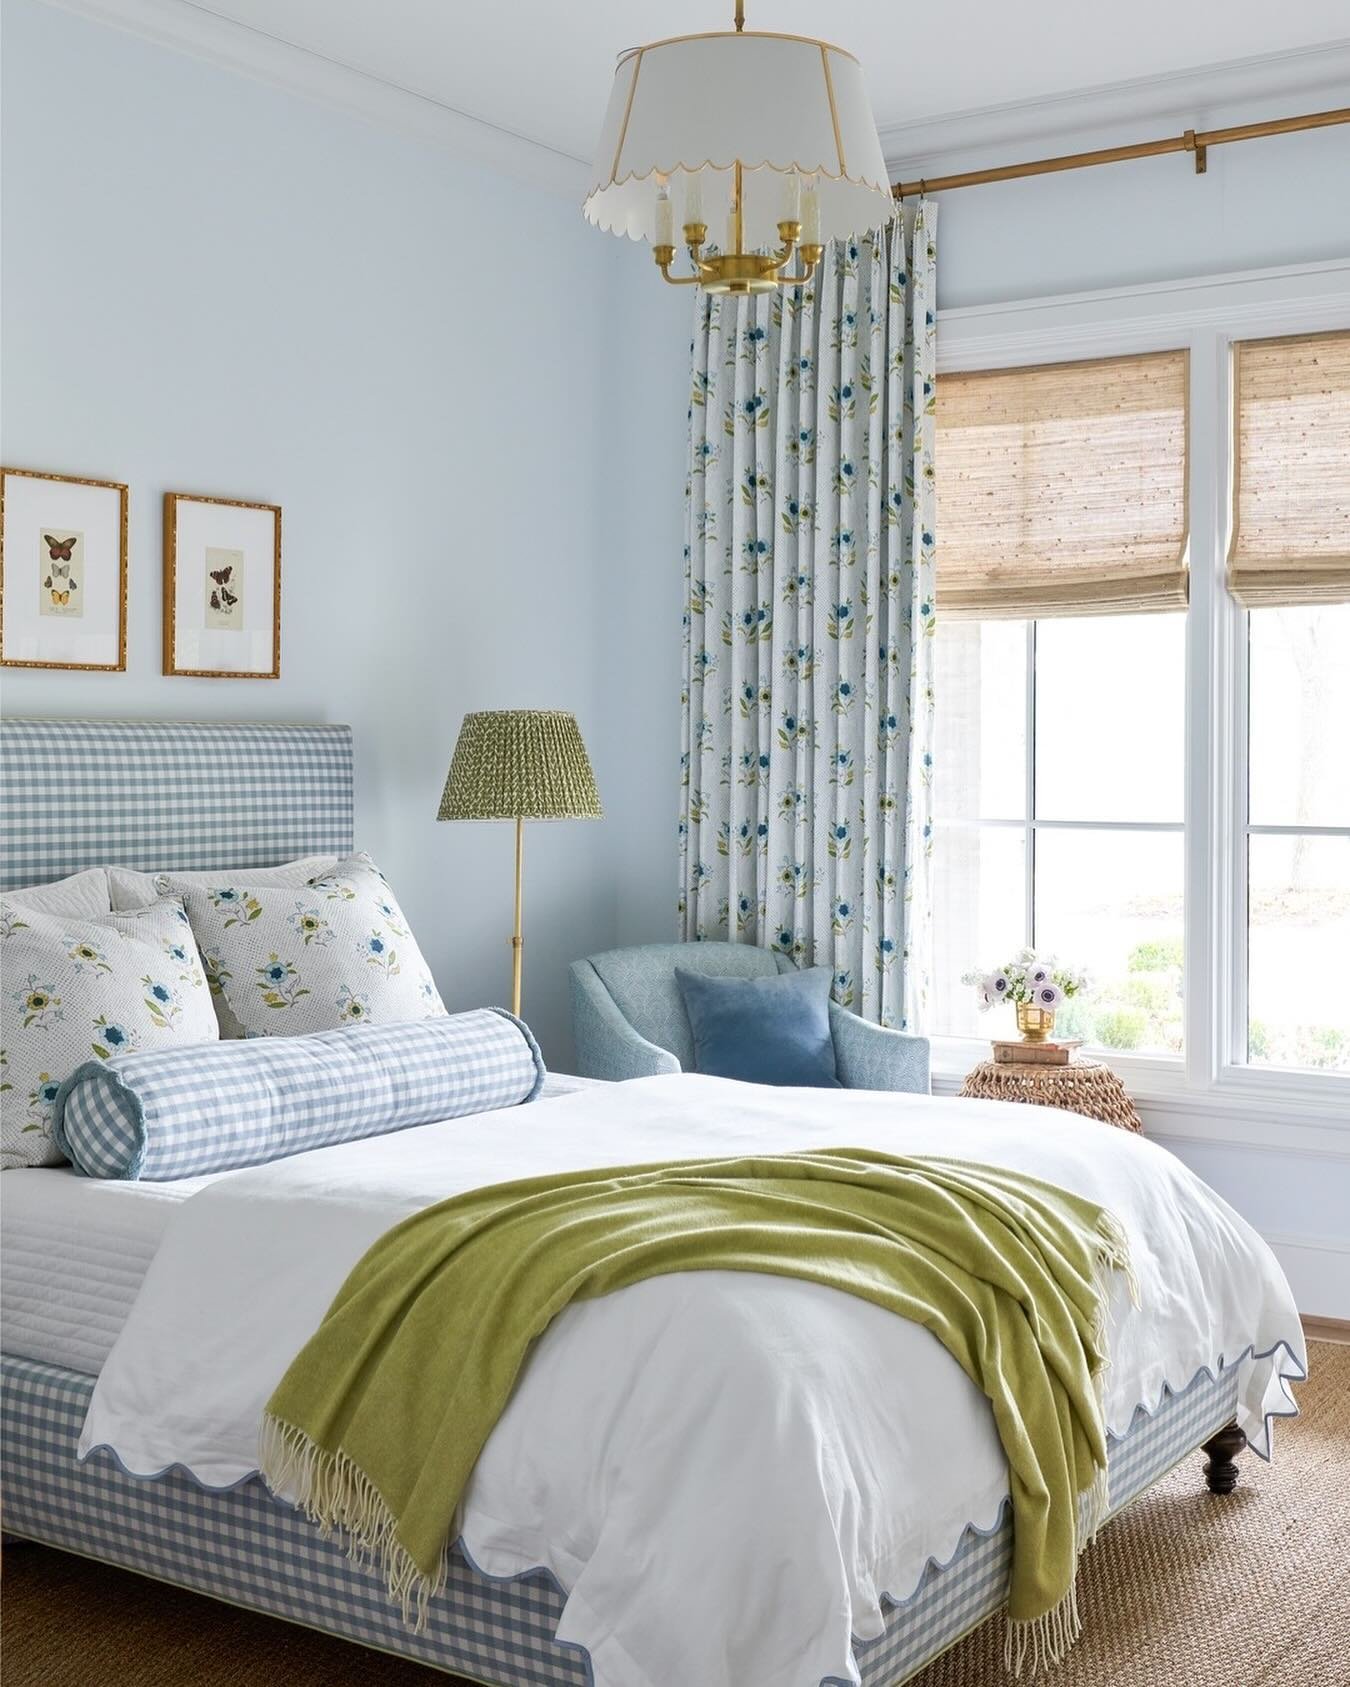 Color wizard Katie Davis sounds off about Farrow &amp; Ball paint on @homesandgardensofficial. 🖌 This bedroom is swathed @farrowandballl&rsquo;s Borrowed Light - a go-to soft blue that&rsquo;s &ldquo;calm and classic,&rdquo; and &ldquo;adds a pop bu